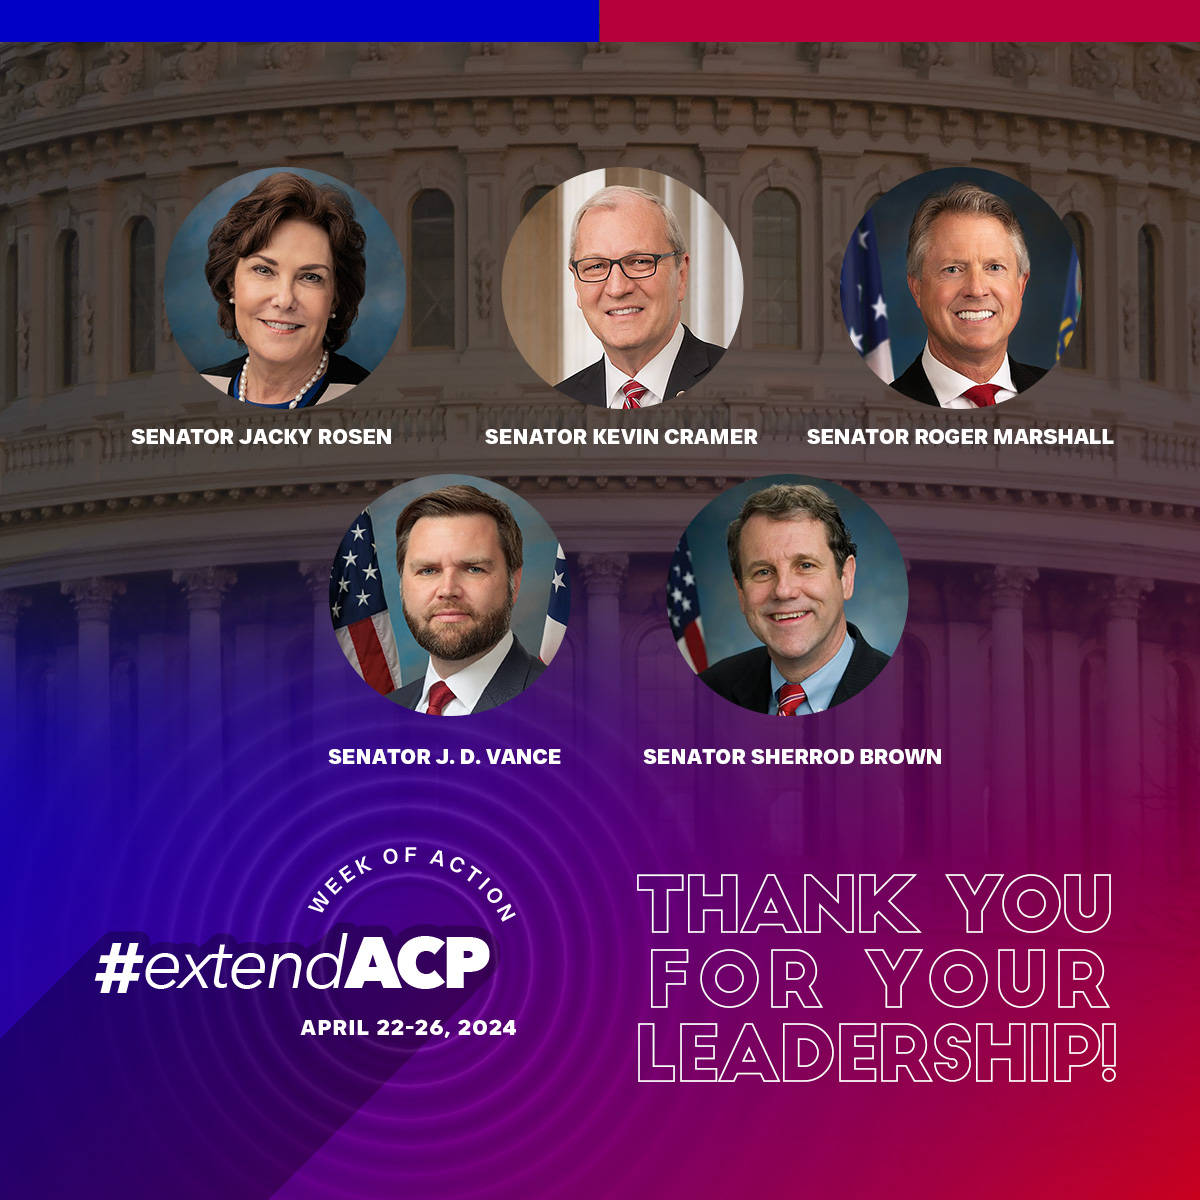 Thanks to the Senate Sponsors of the Affordable Connectivity Program Extension Act of 2024! This game-changing, market driven approach to expanding digital connectivity has effectively created new on-ramps to shared prosperity and economic growth nationwide. #ExtendACP #ACP